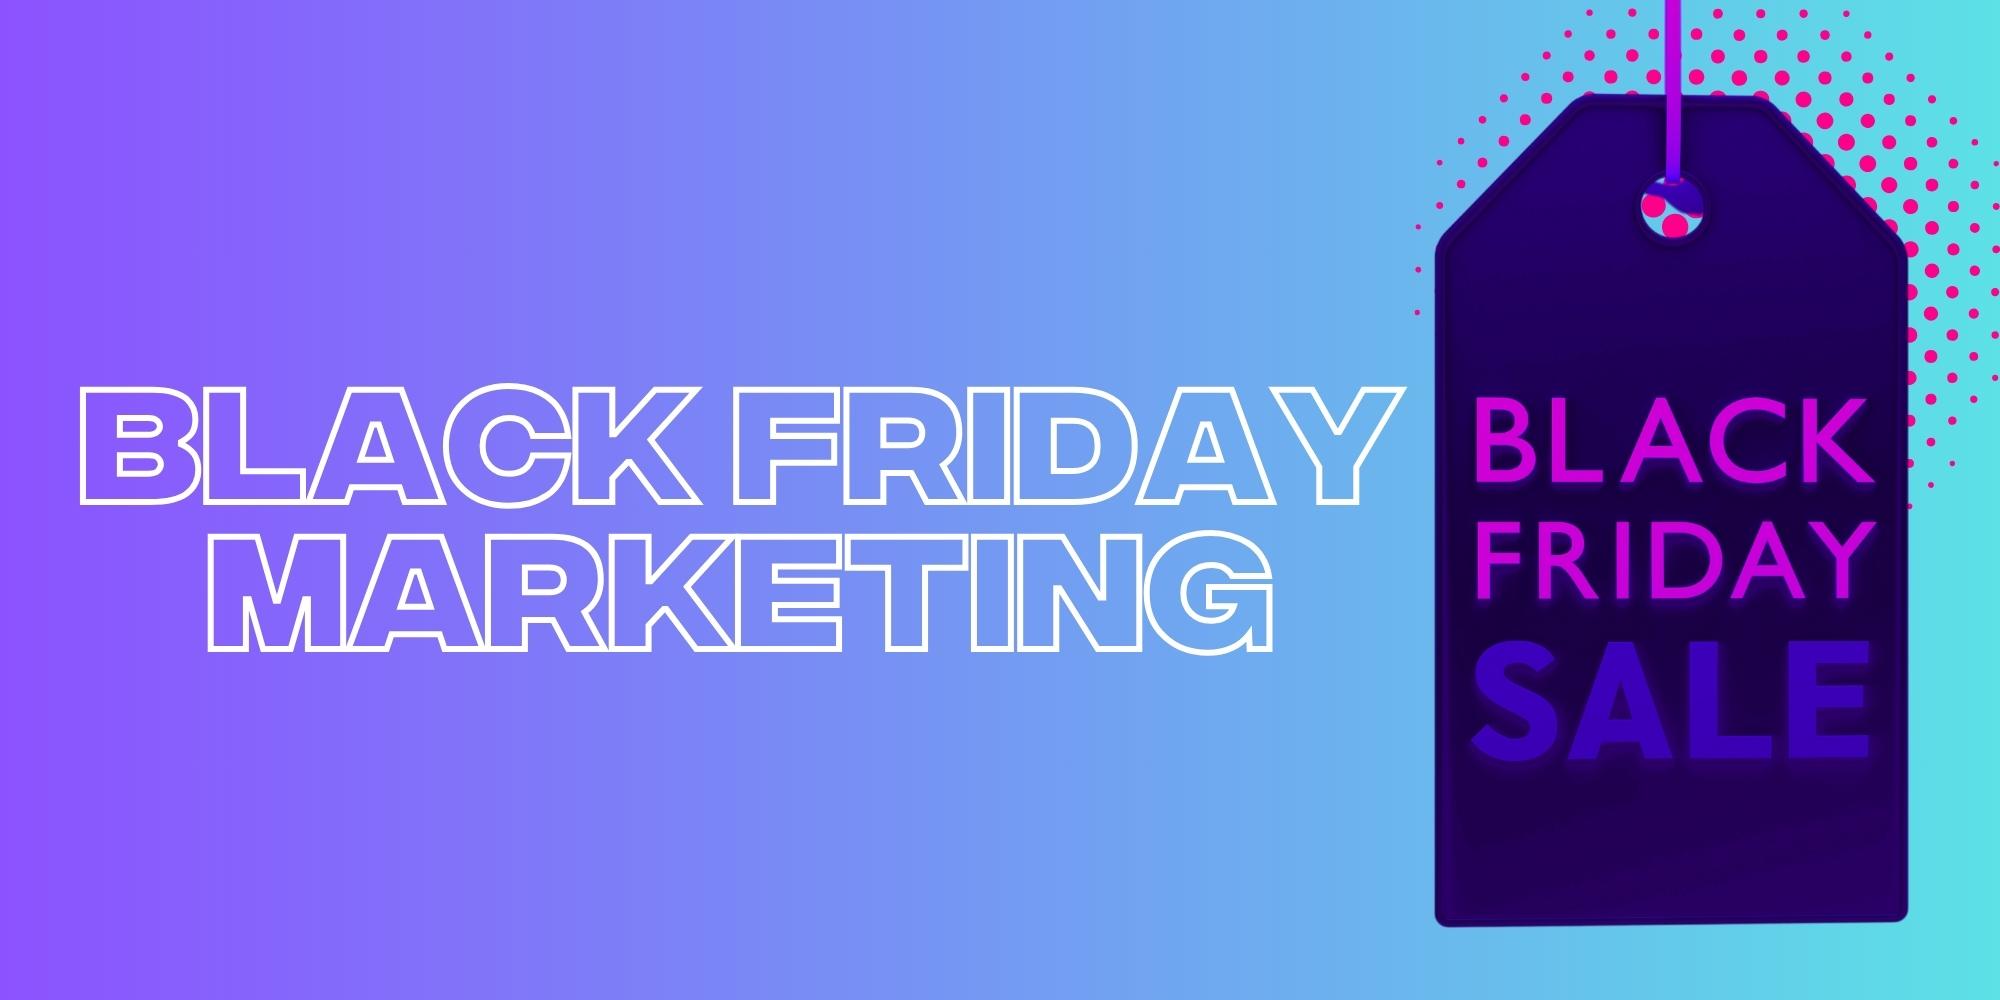 Black Friday Marketing Ideas: Set Yourself Up For Success Socially Powerful